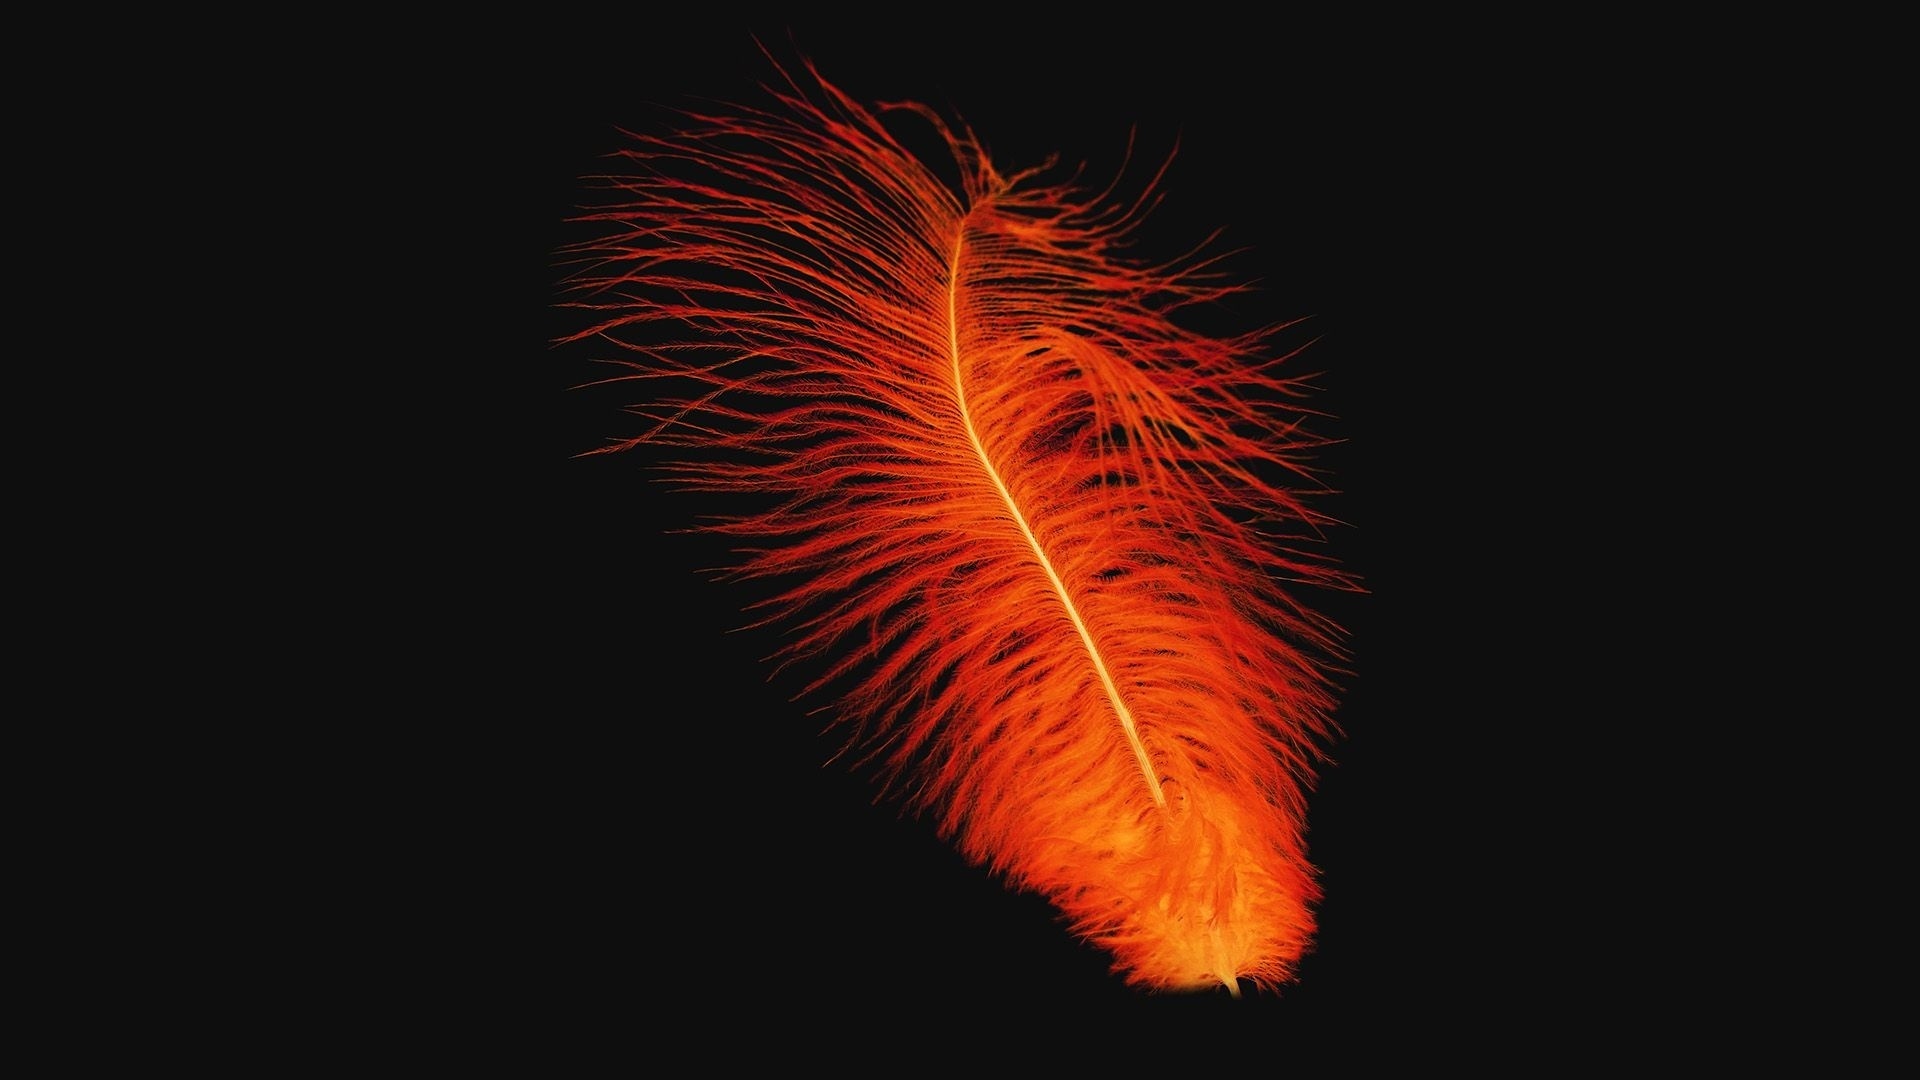 Feather: Semiplume, combining a large rachis with downy vanes. 1920x1080 Full HD Wallpaper.